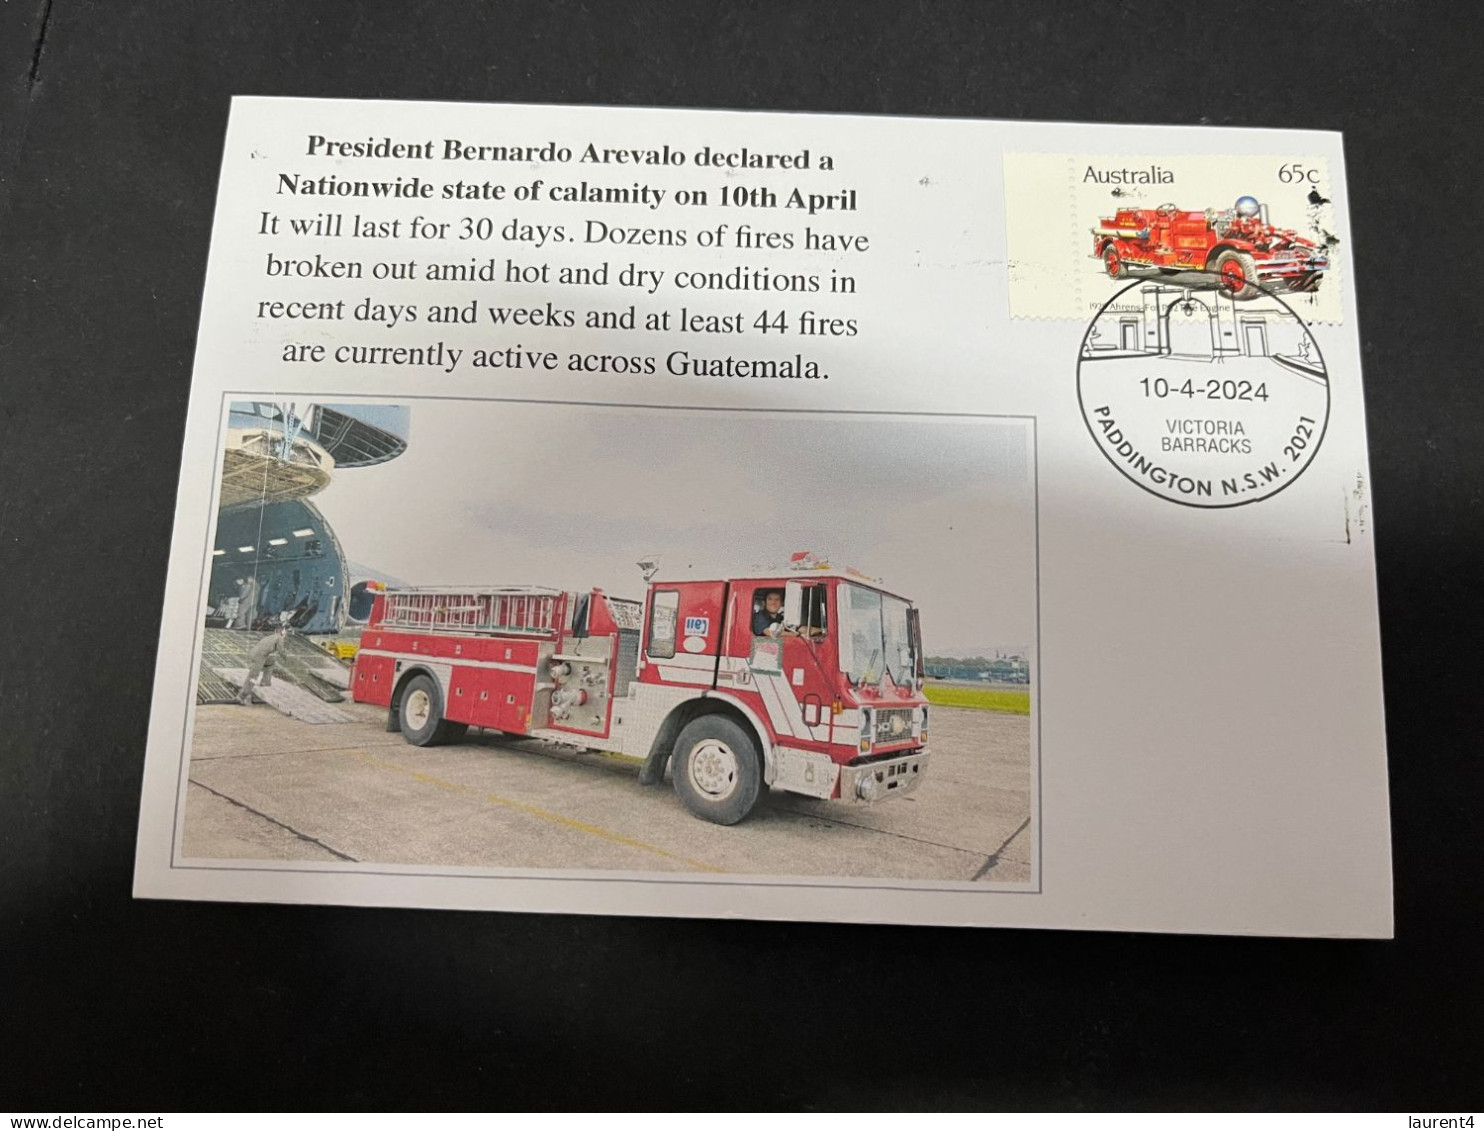 8-5-2024 (4 Z 27) Guatemala President Declared Nationwide State Of Calamity On 10th April (Fire Truck Stamp) - Sapeurs-Pompiers